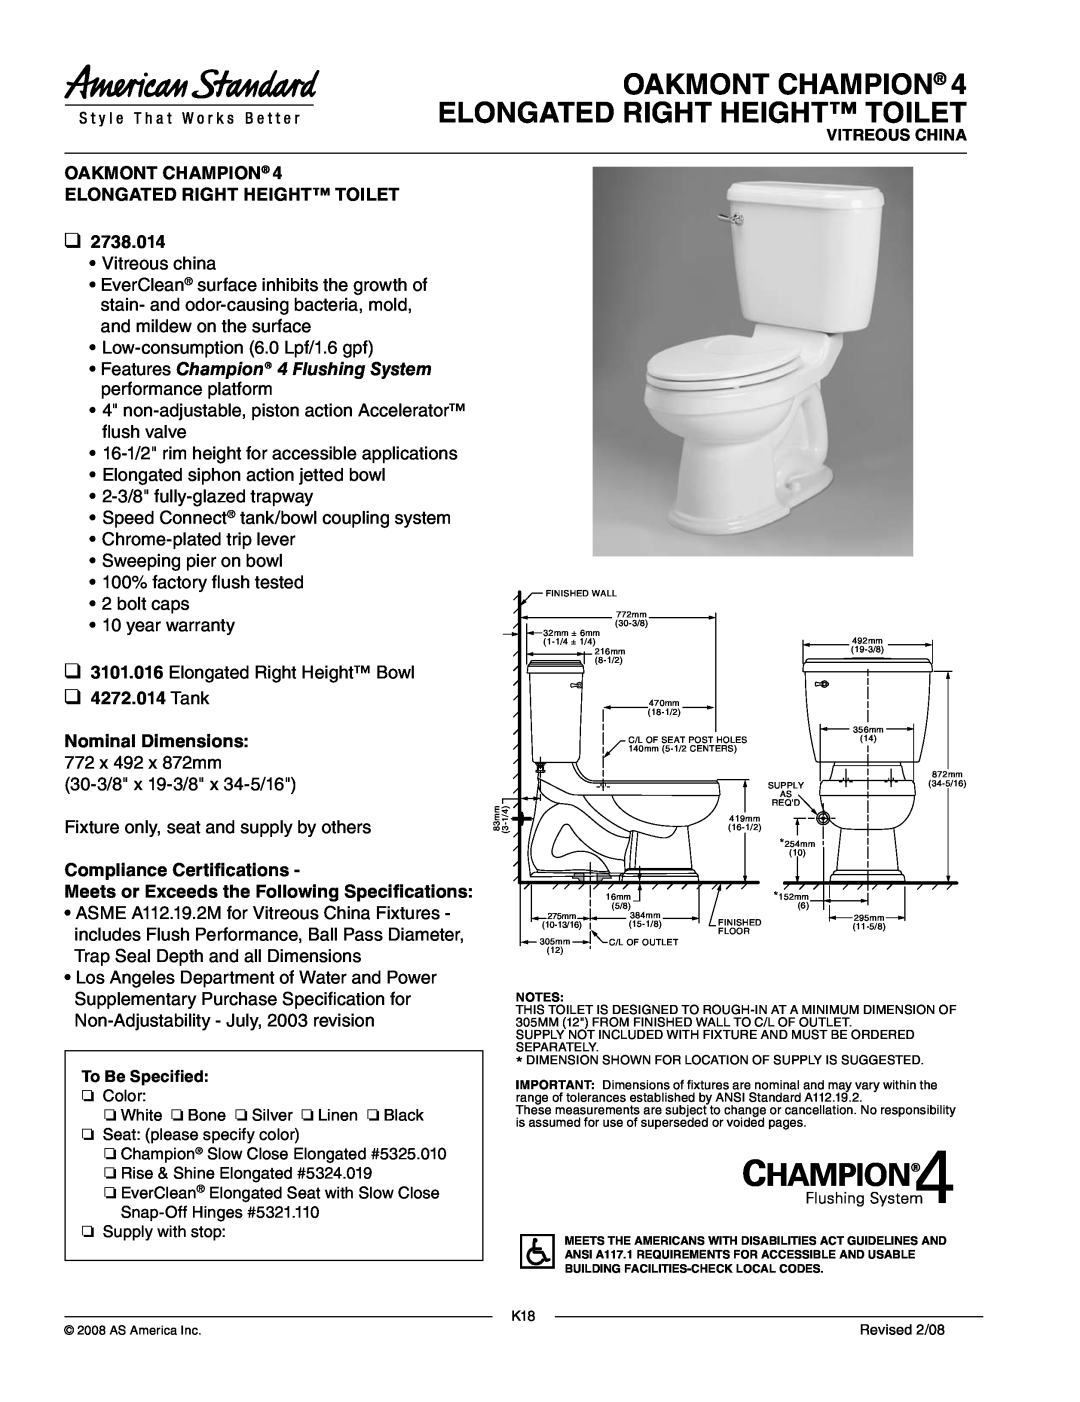 American Standard 3101.016 warranty Oakmont Champion Elongated Right Height Toilet, 2738.014, Tank Nominal Dimensions 